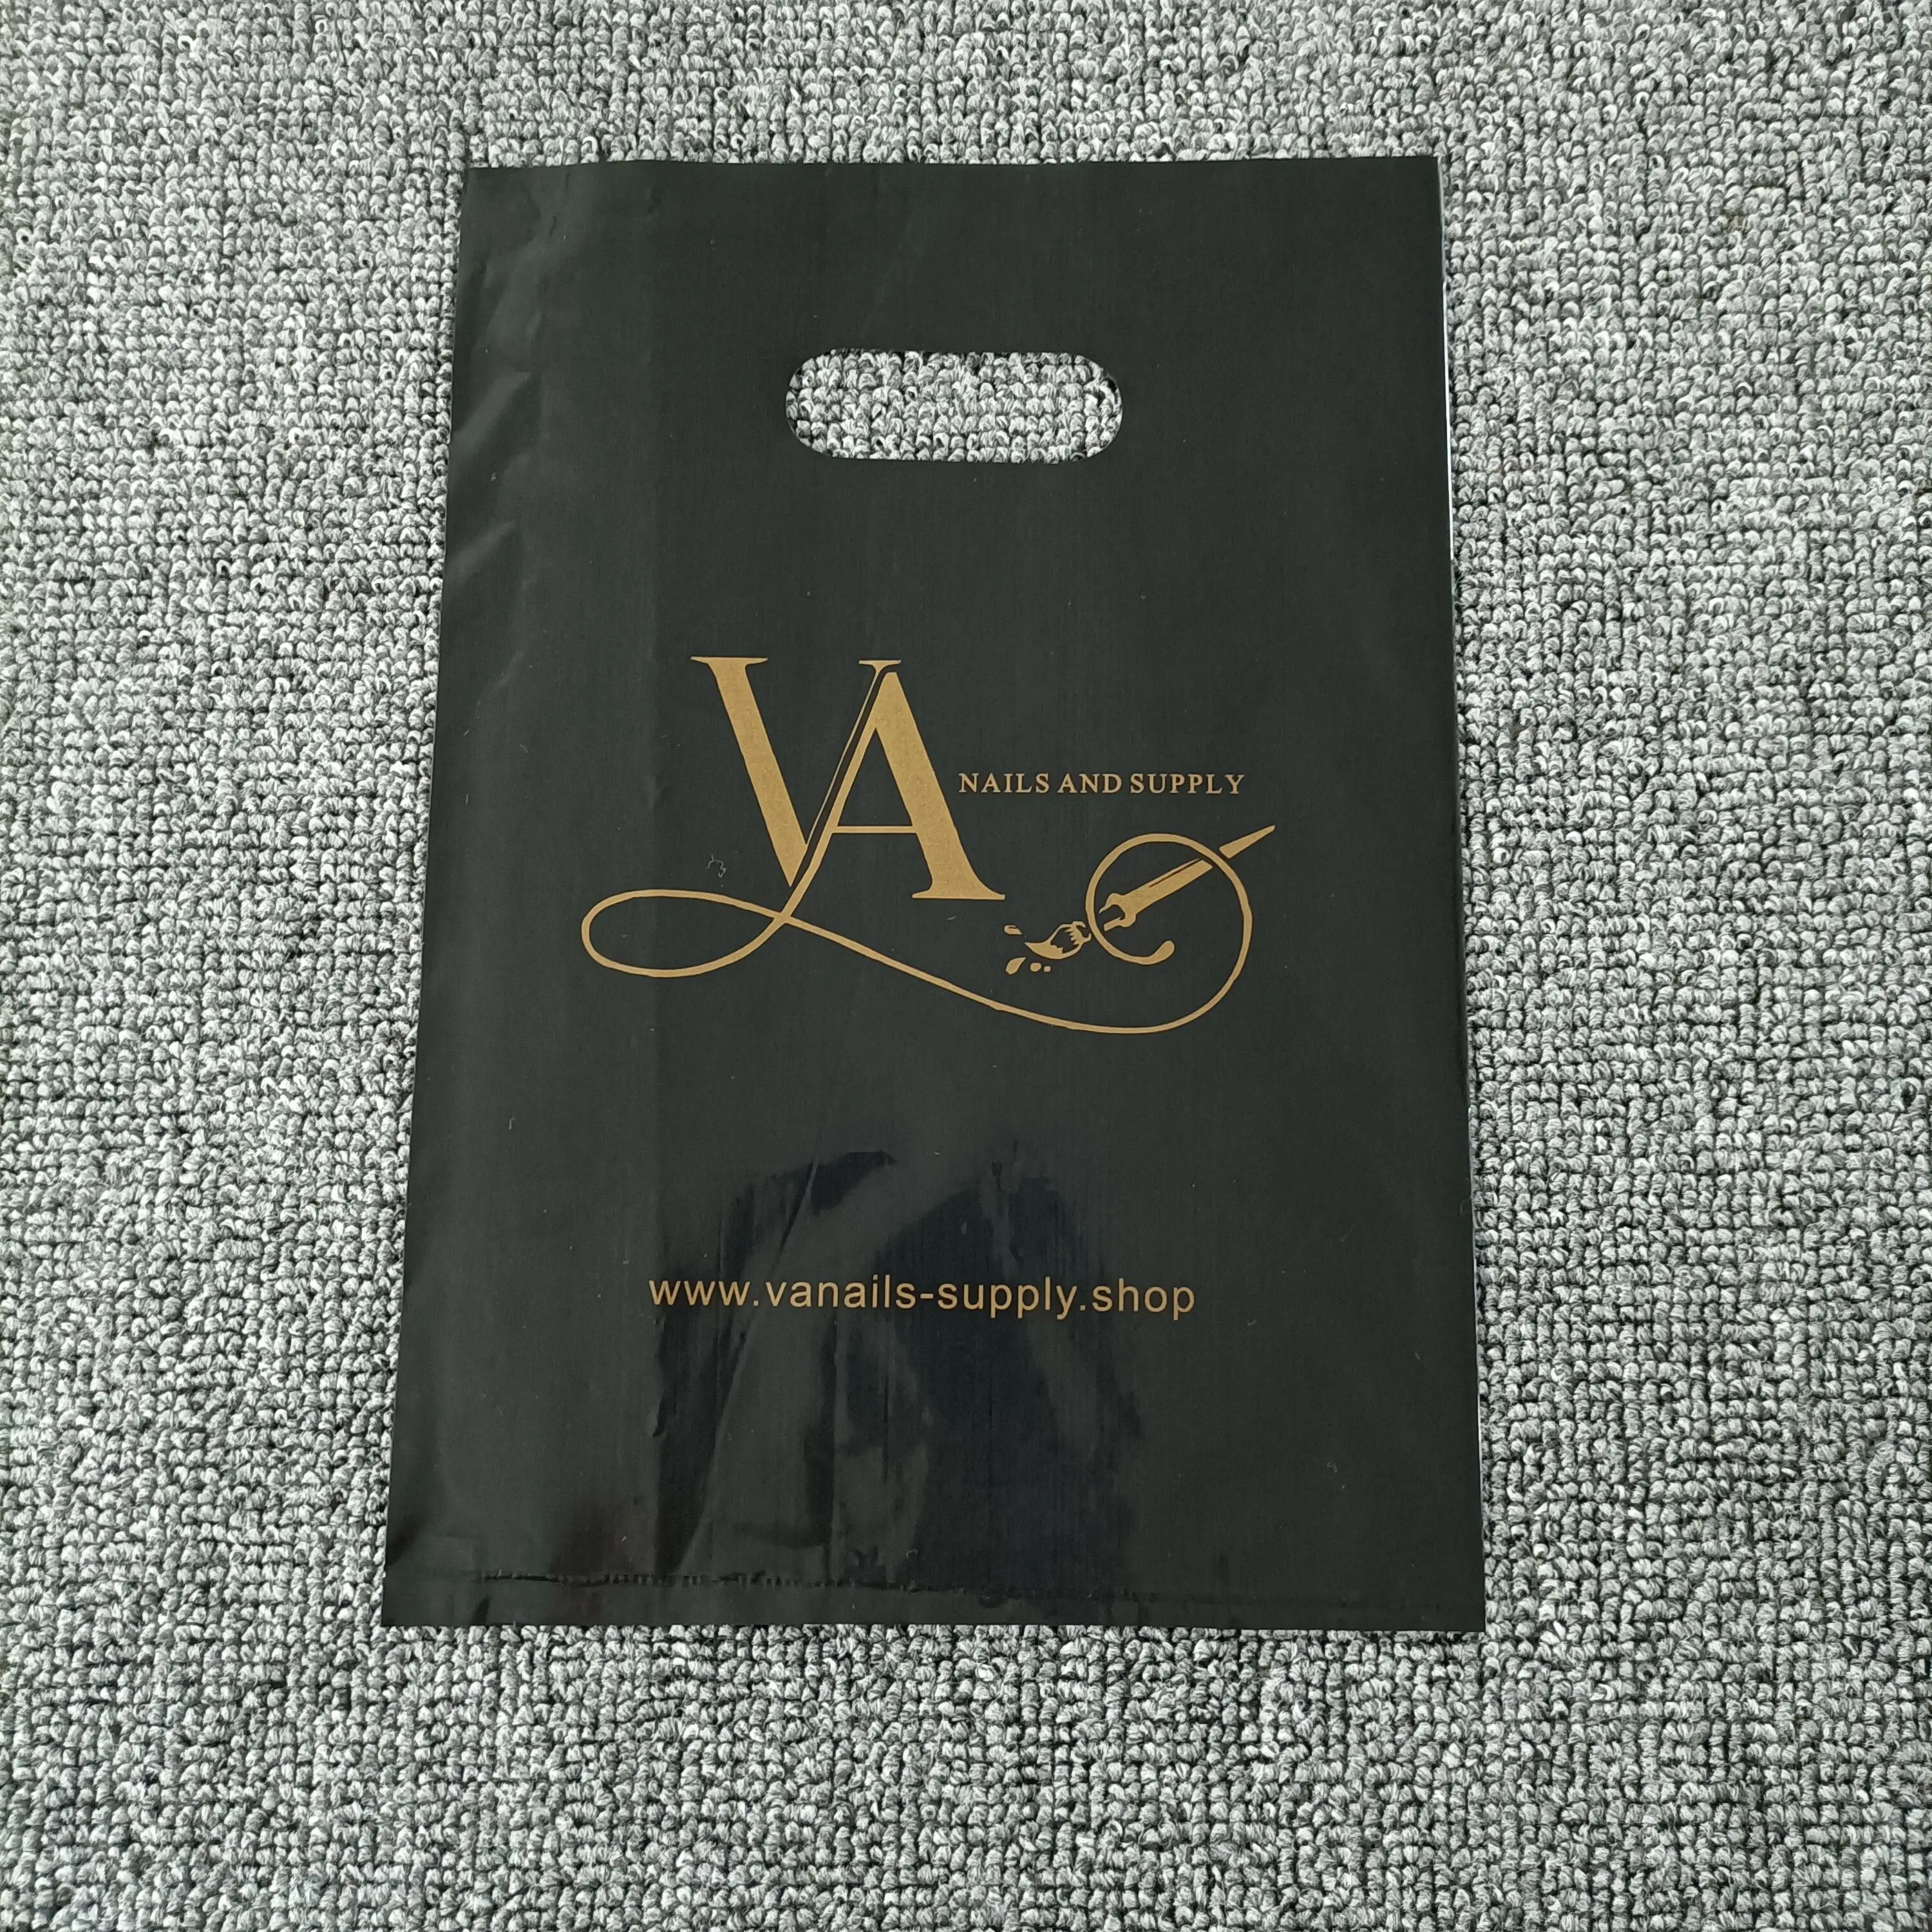 

Custom envelopes plastic Die Cut Plastic Shopping Bags Reusable Gift Shipping Bags with Handles